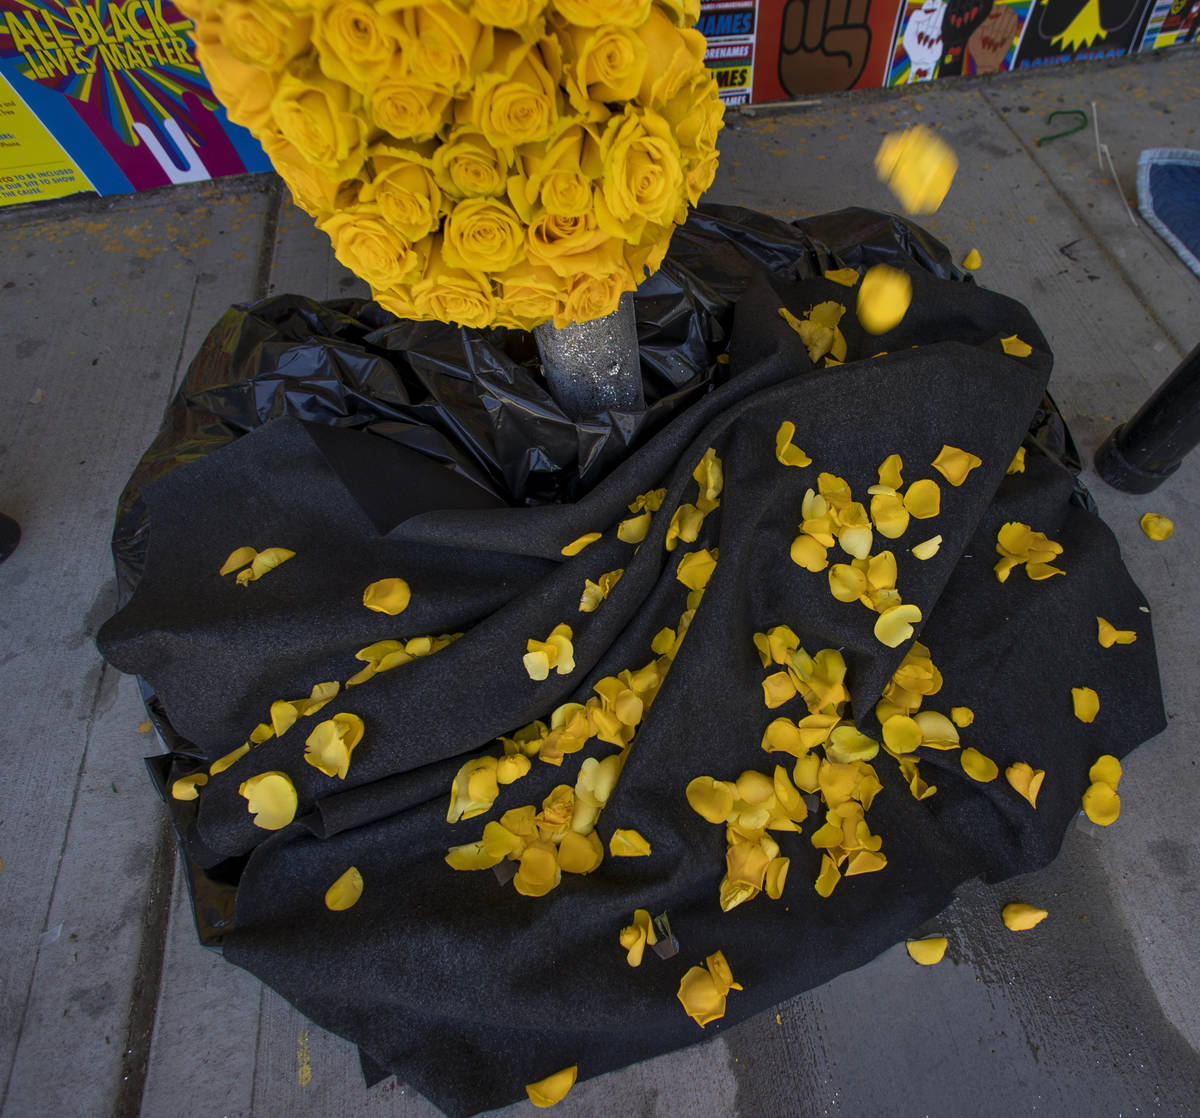 Real yellow rose petals are dropped about a bleeding heart shaped display as the experiential c ...